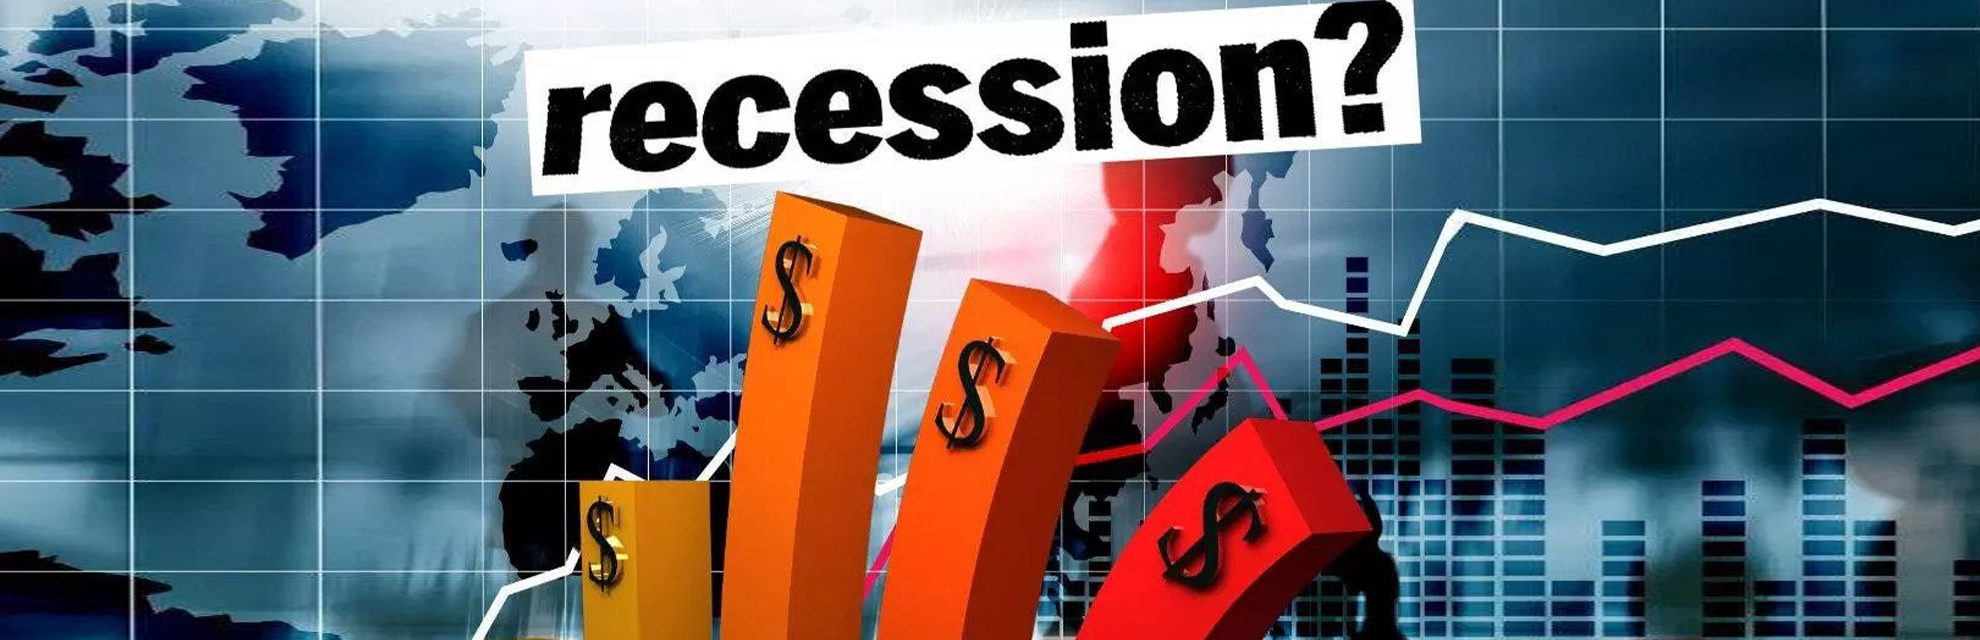 Has the world dodged recession? Reasons for hope, caution